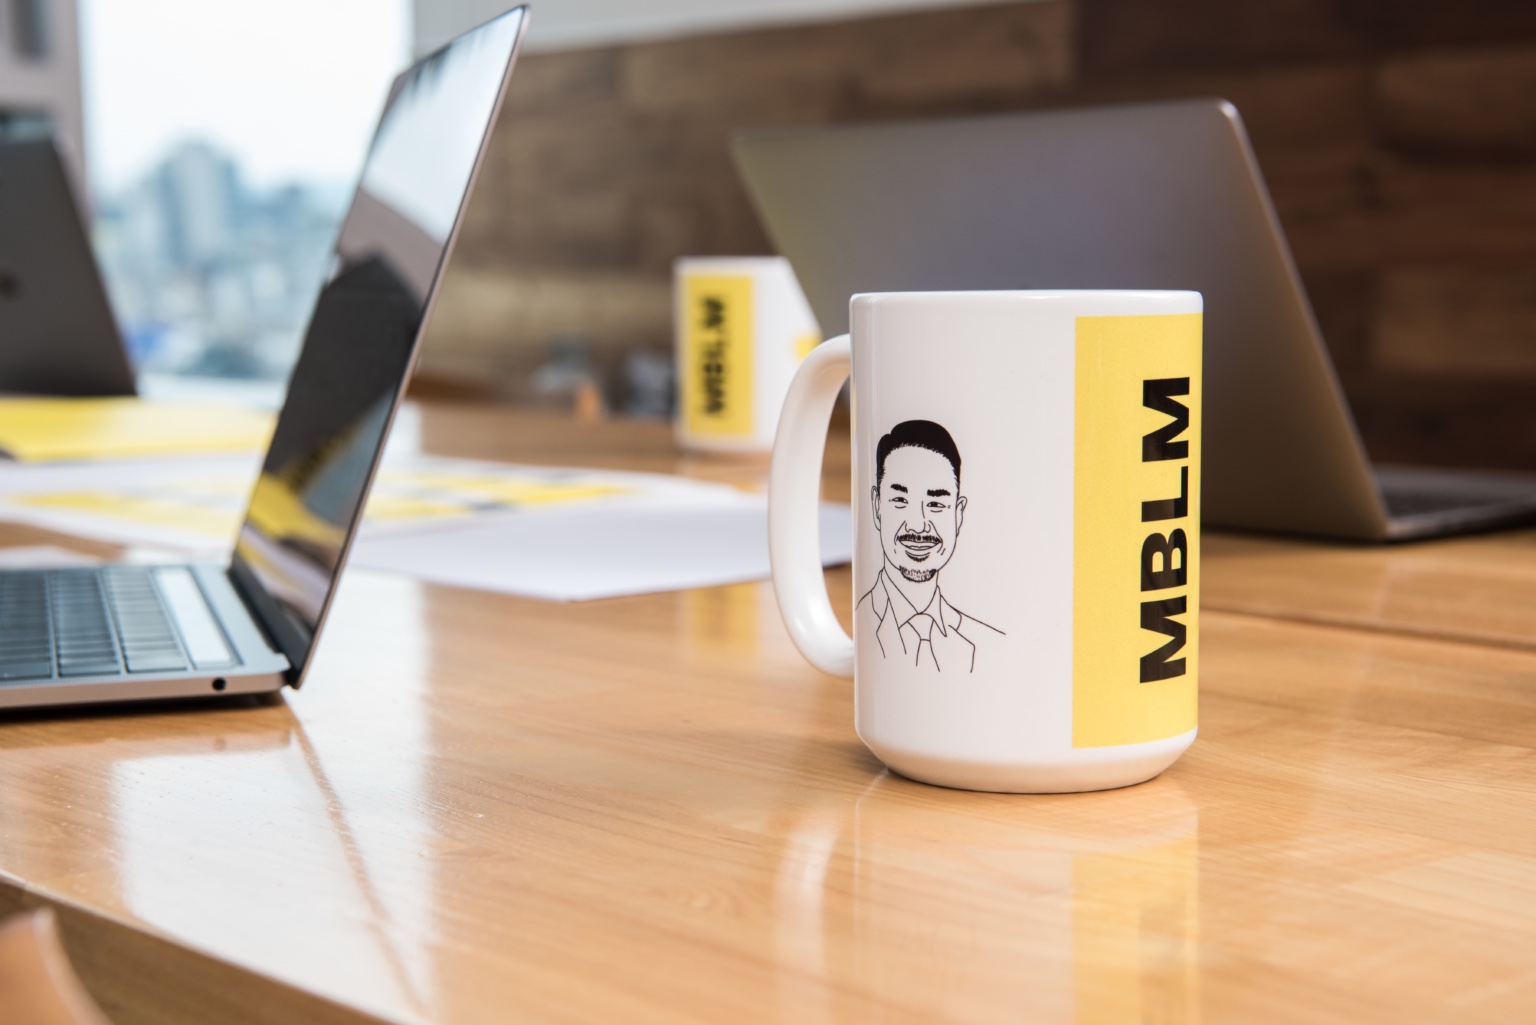 A coffee mug with the word mblm on it sits on a desk.